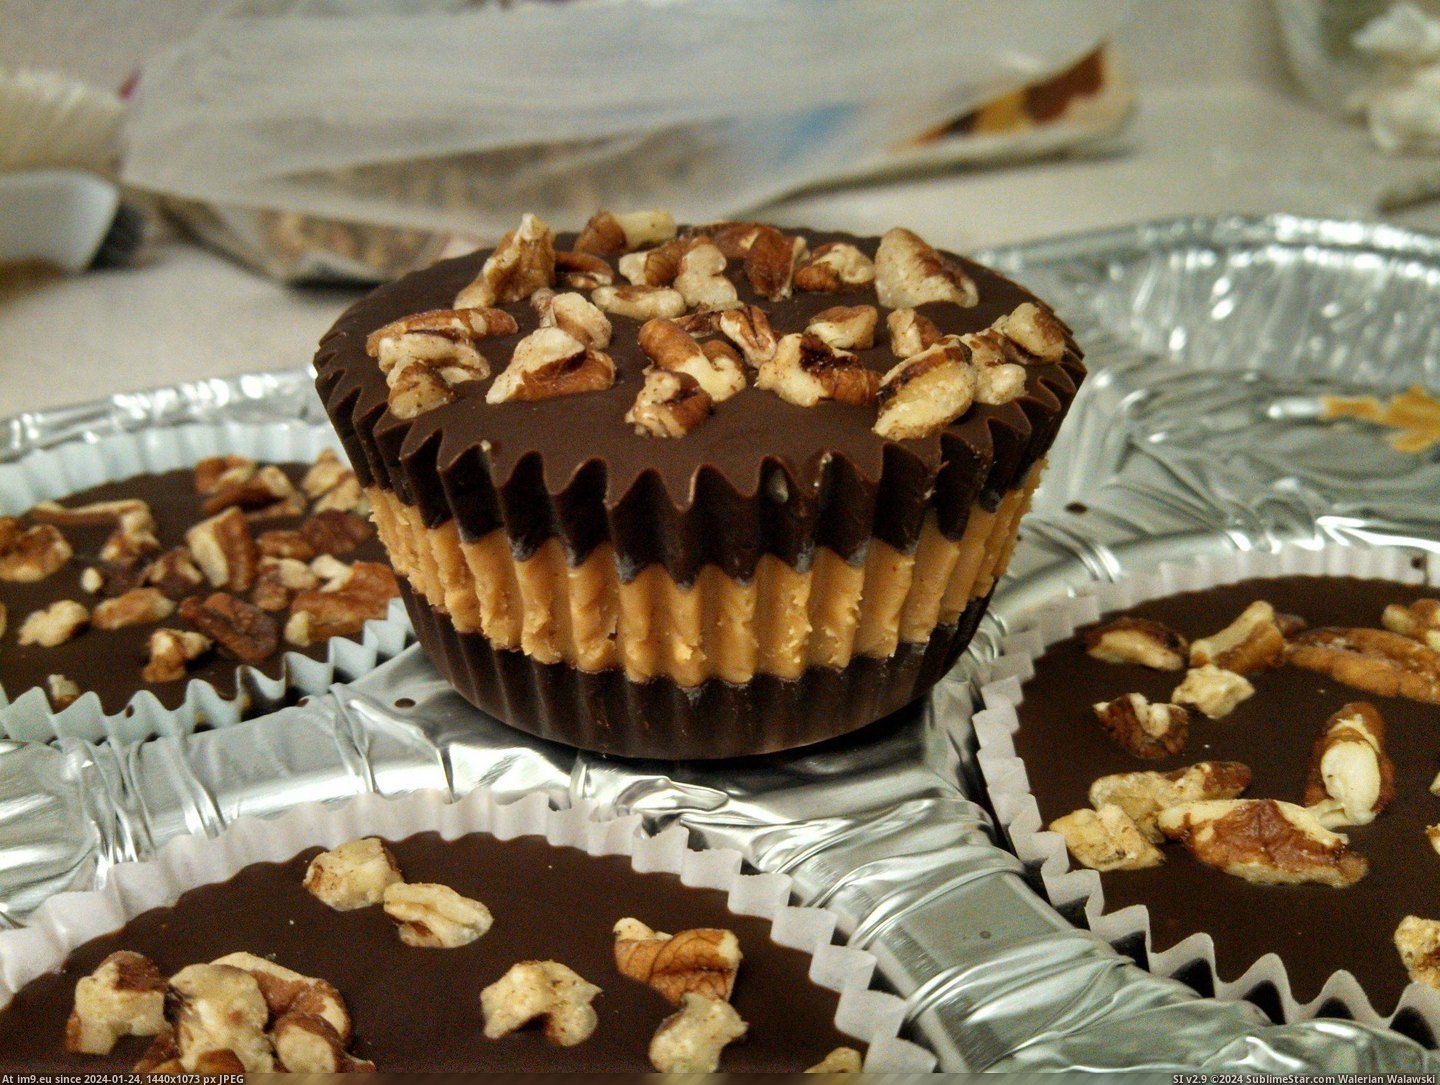 #Cup #Peanut #Butter #Homemade [Pics] Homemade Peanut Butter Cup Pic. (Изображение из альбом My r/PICS favs))